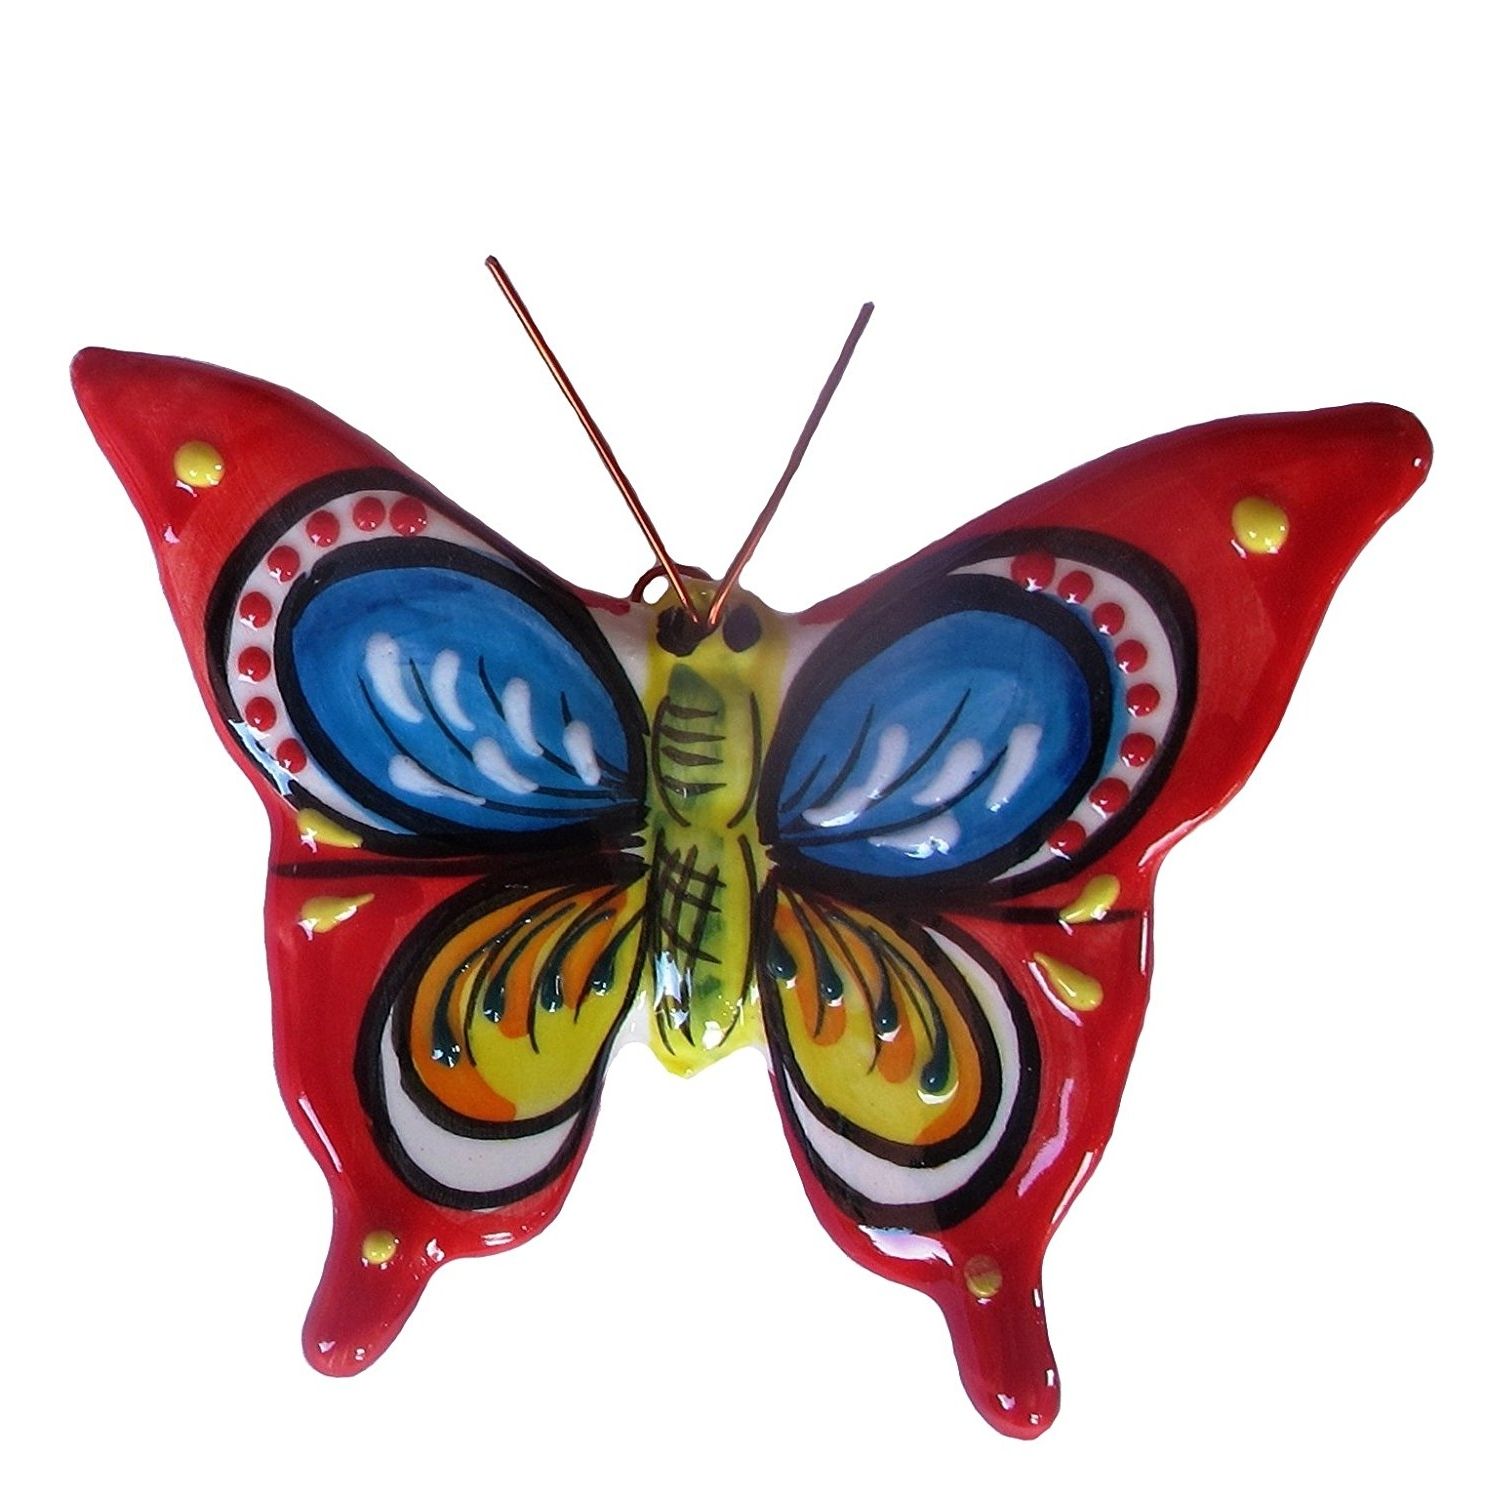 Ceramic Butterfly Wall Art With Regard To Most Up To Date Amazon: Spanish Butterflies – Set Of 4 Small Ceramic Wall (View 4 of 15)